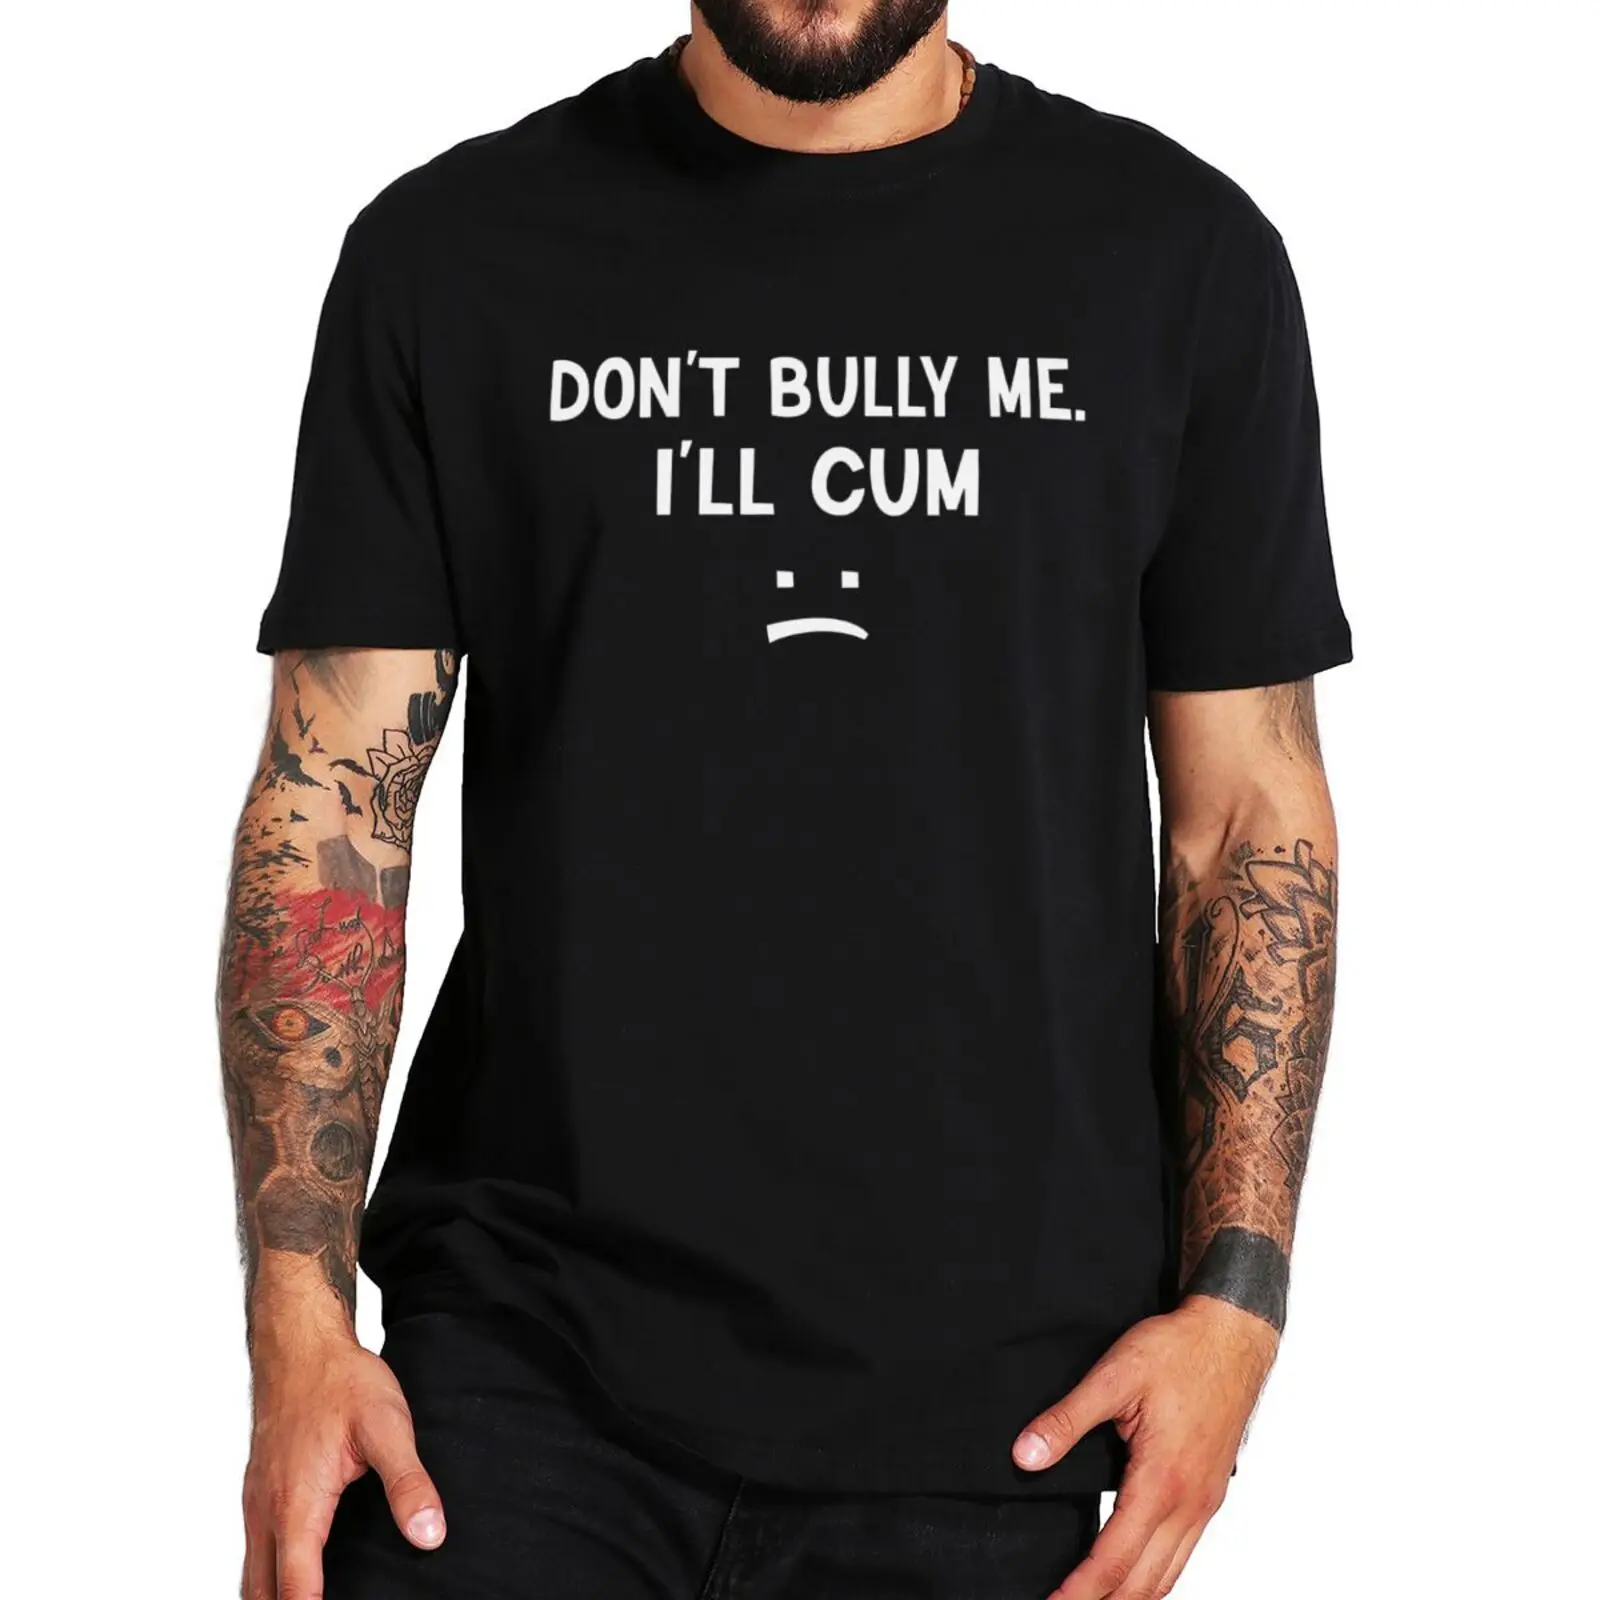 

Don't Bully Me I'll T Shirt Funny Memes Sexy Adult Jokes Humor Tee Tops 100% Cotton Soft Unisex Summer Casual T-shirt